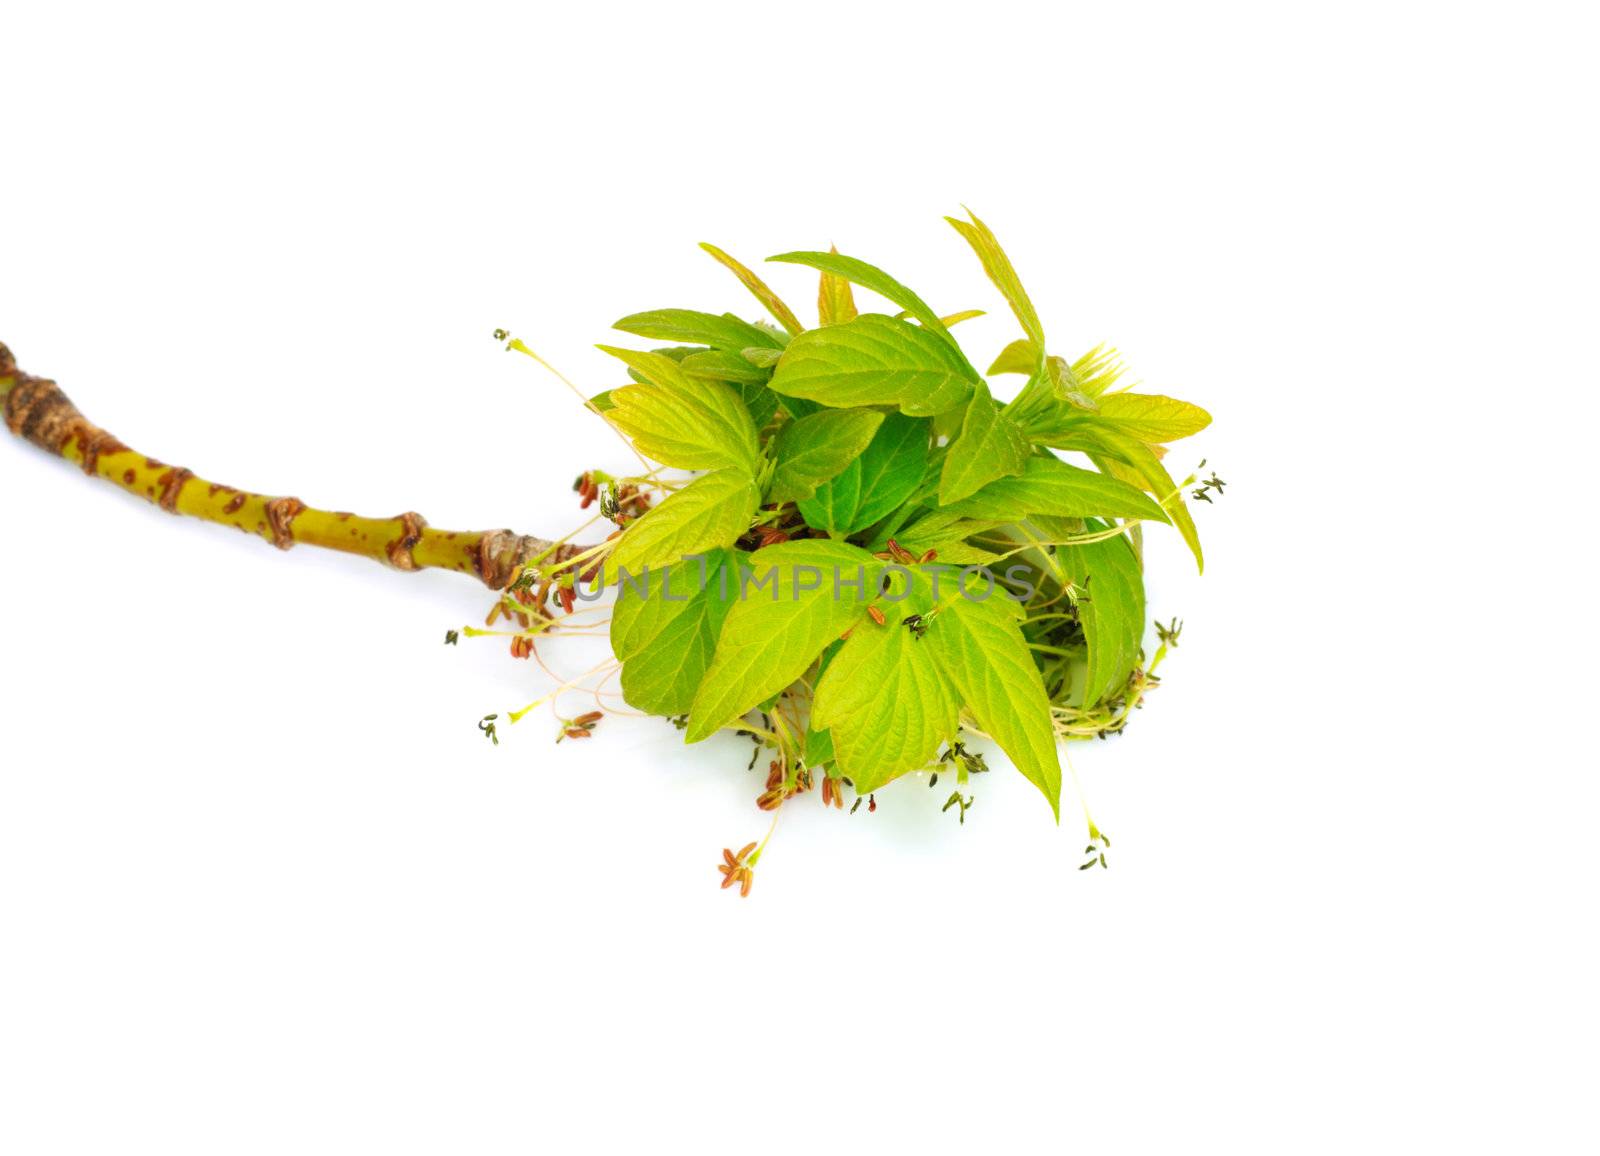 young leaves of maple on a white background by schankz